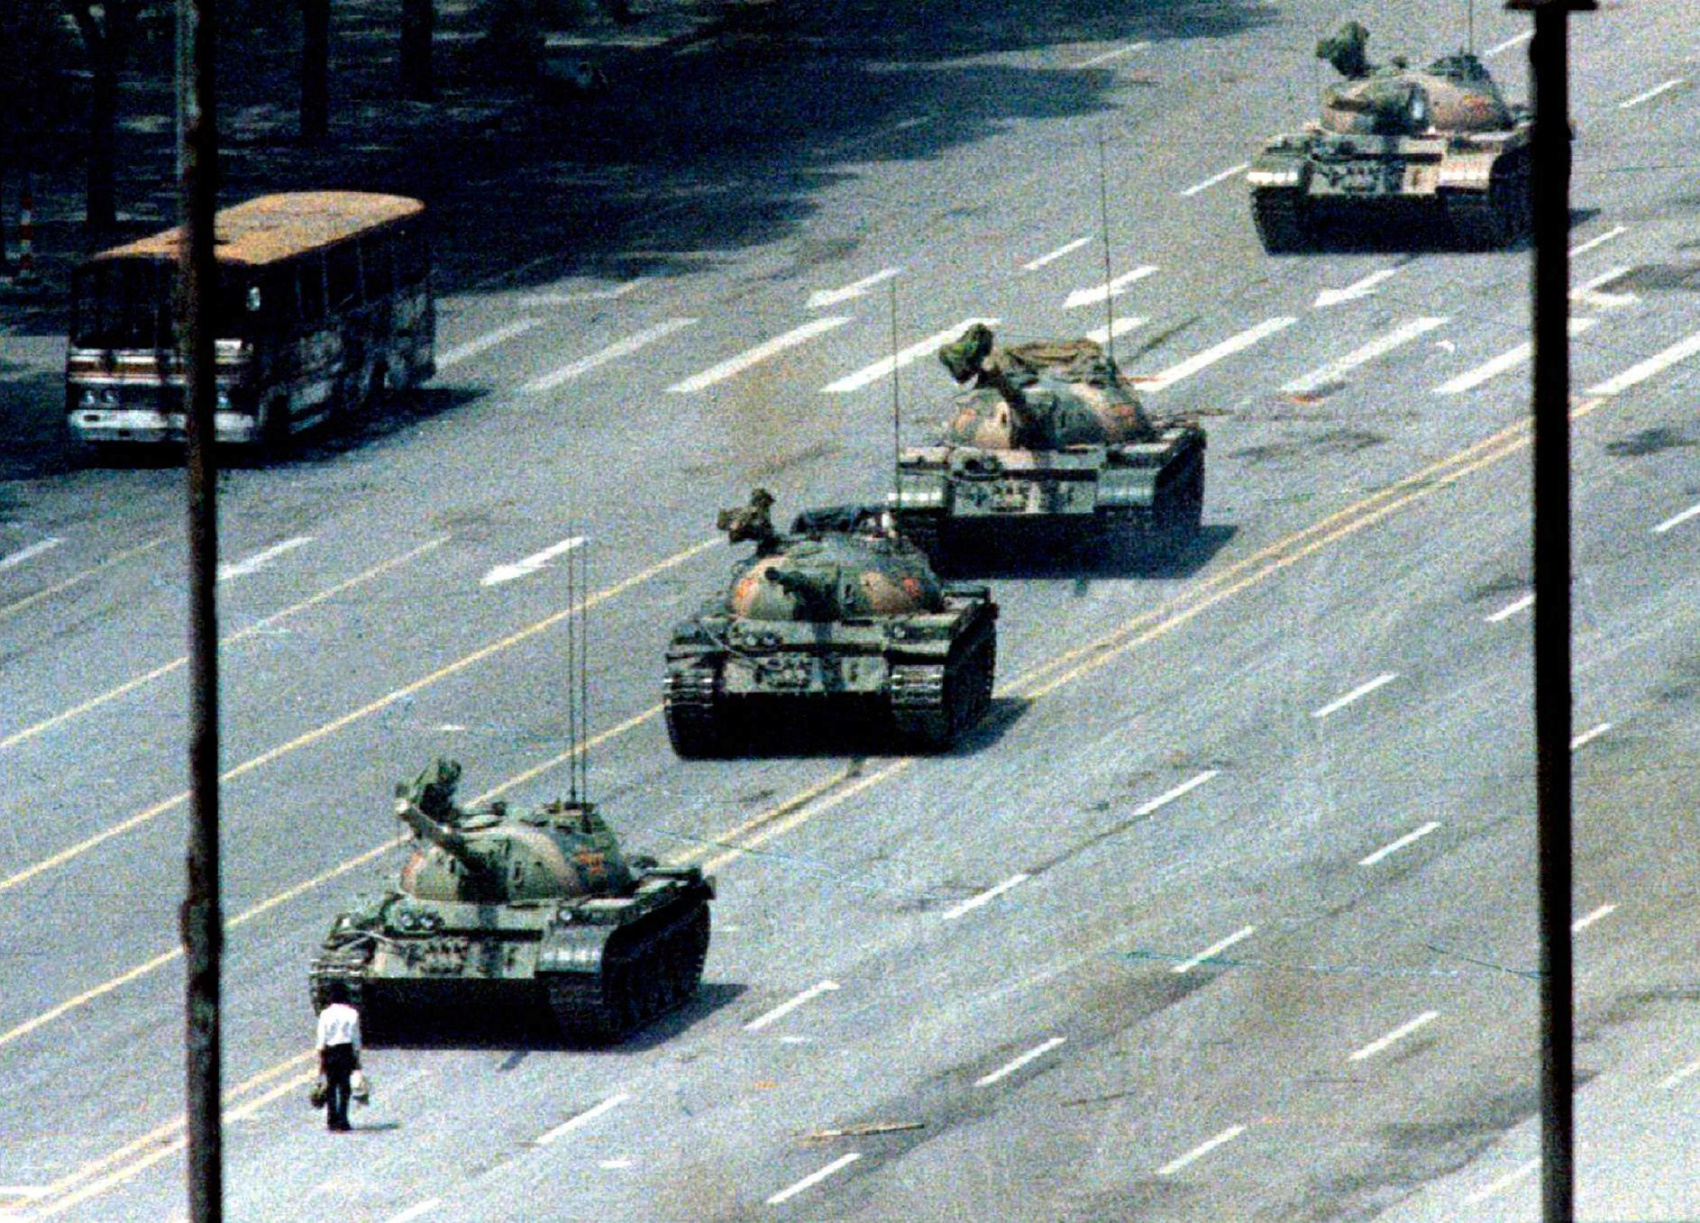 The Tiananmen Square Massacre – 30 Years Later